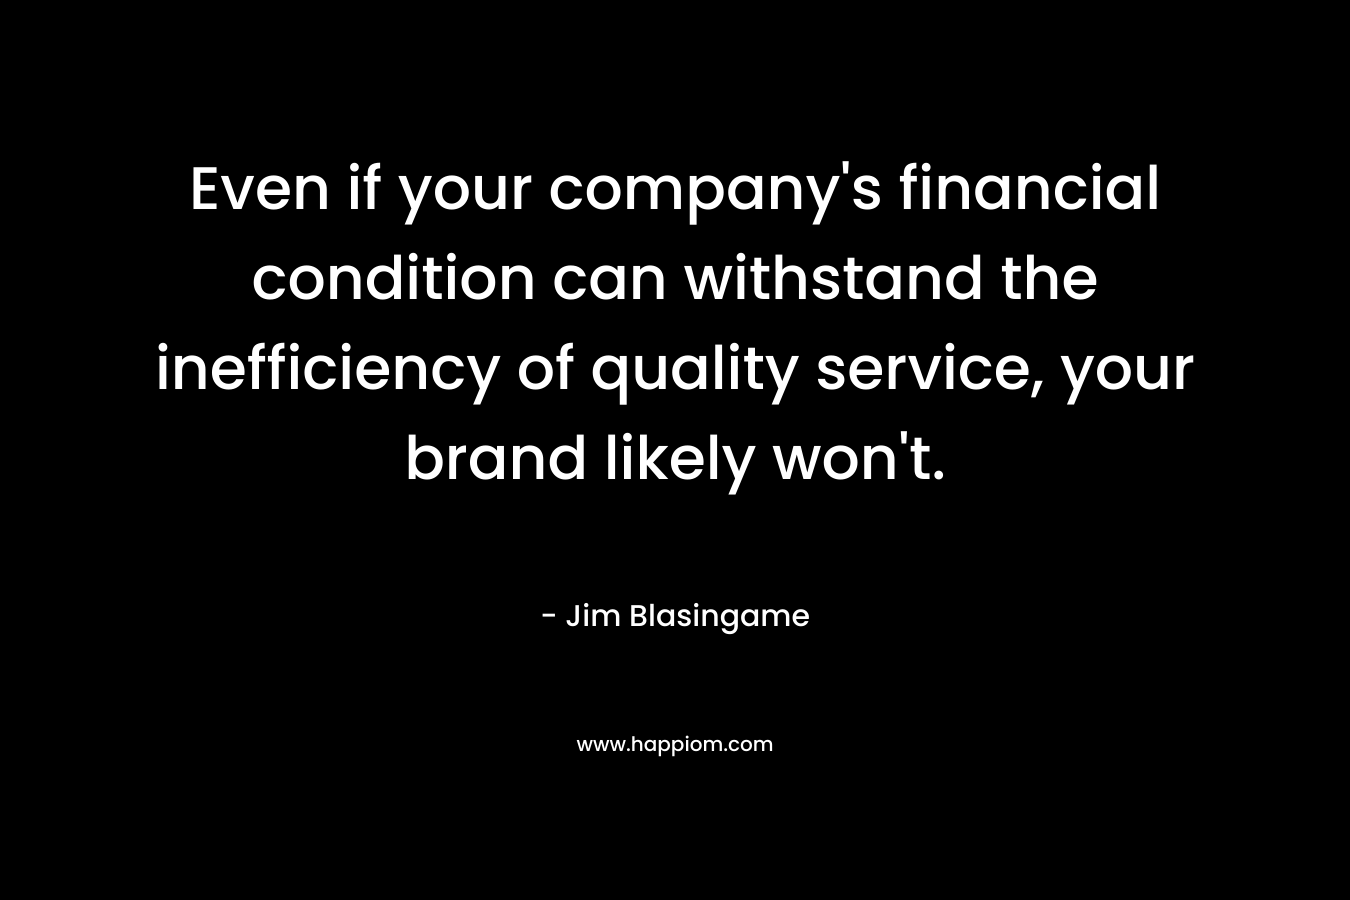 Even if your company’s financial condition can withstand the inefficiency of quality service, your brand likely won’t. – Jim Blasingame